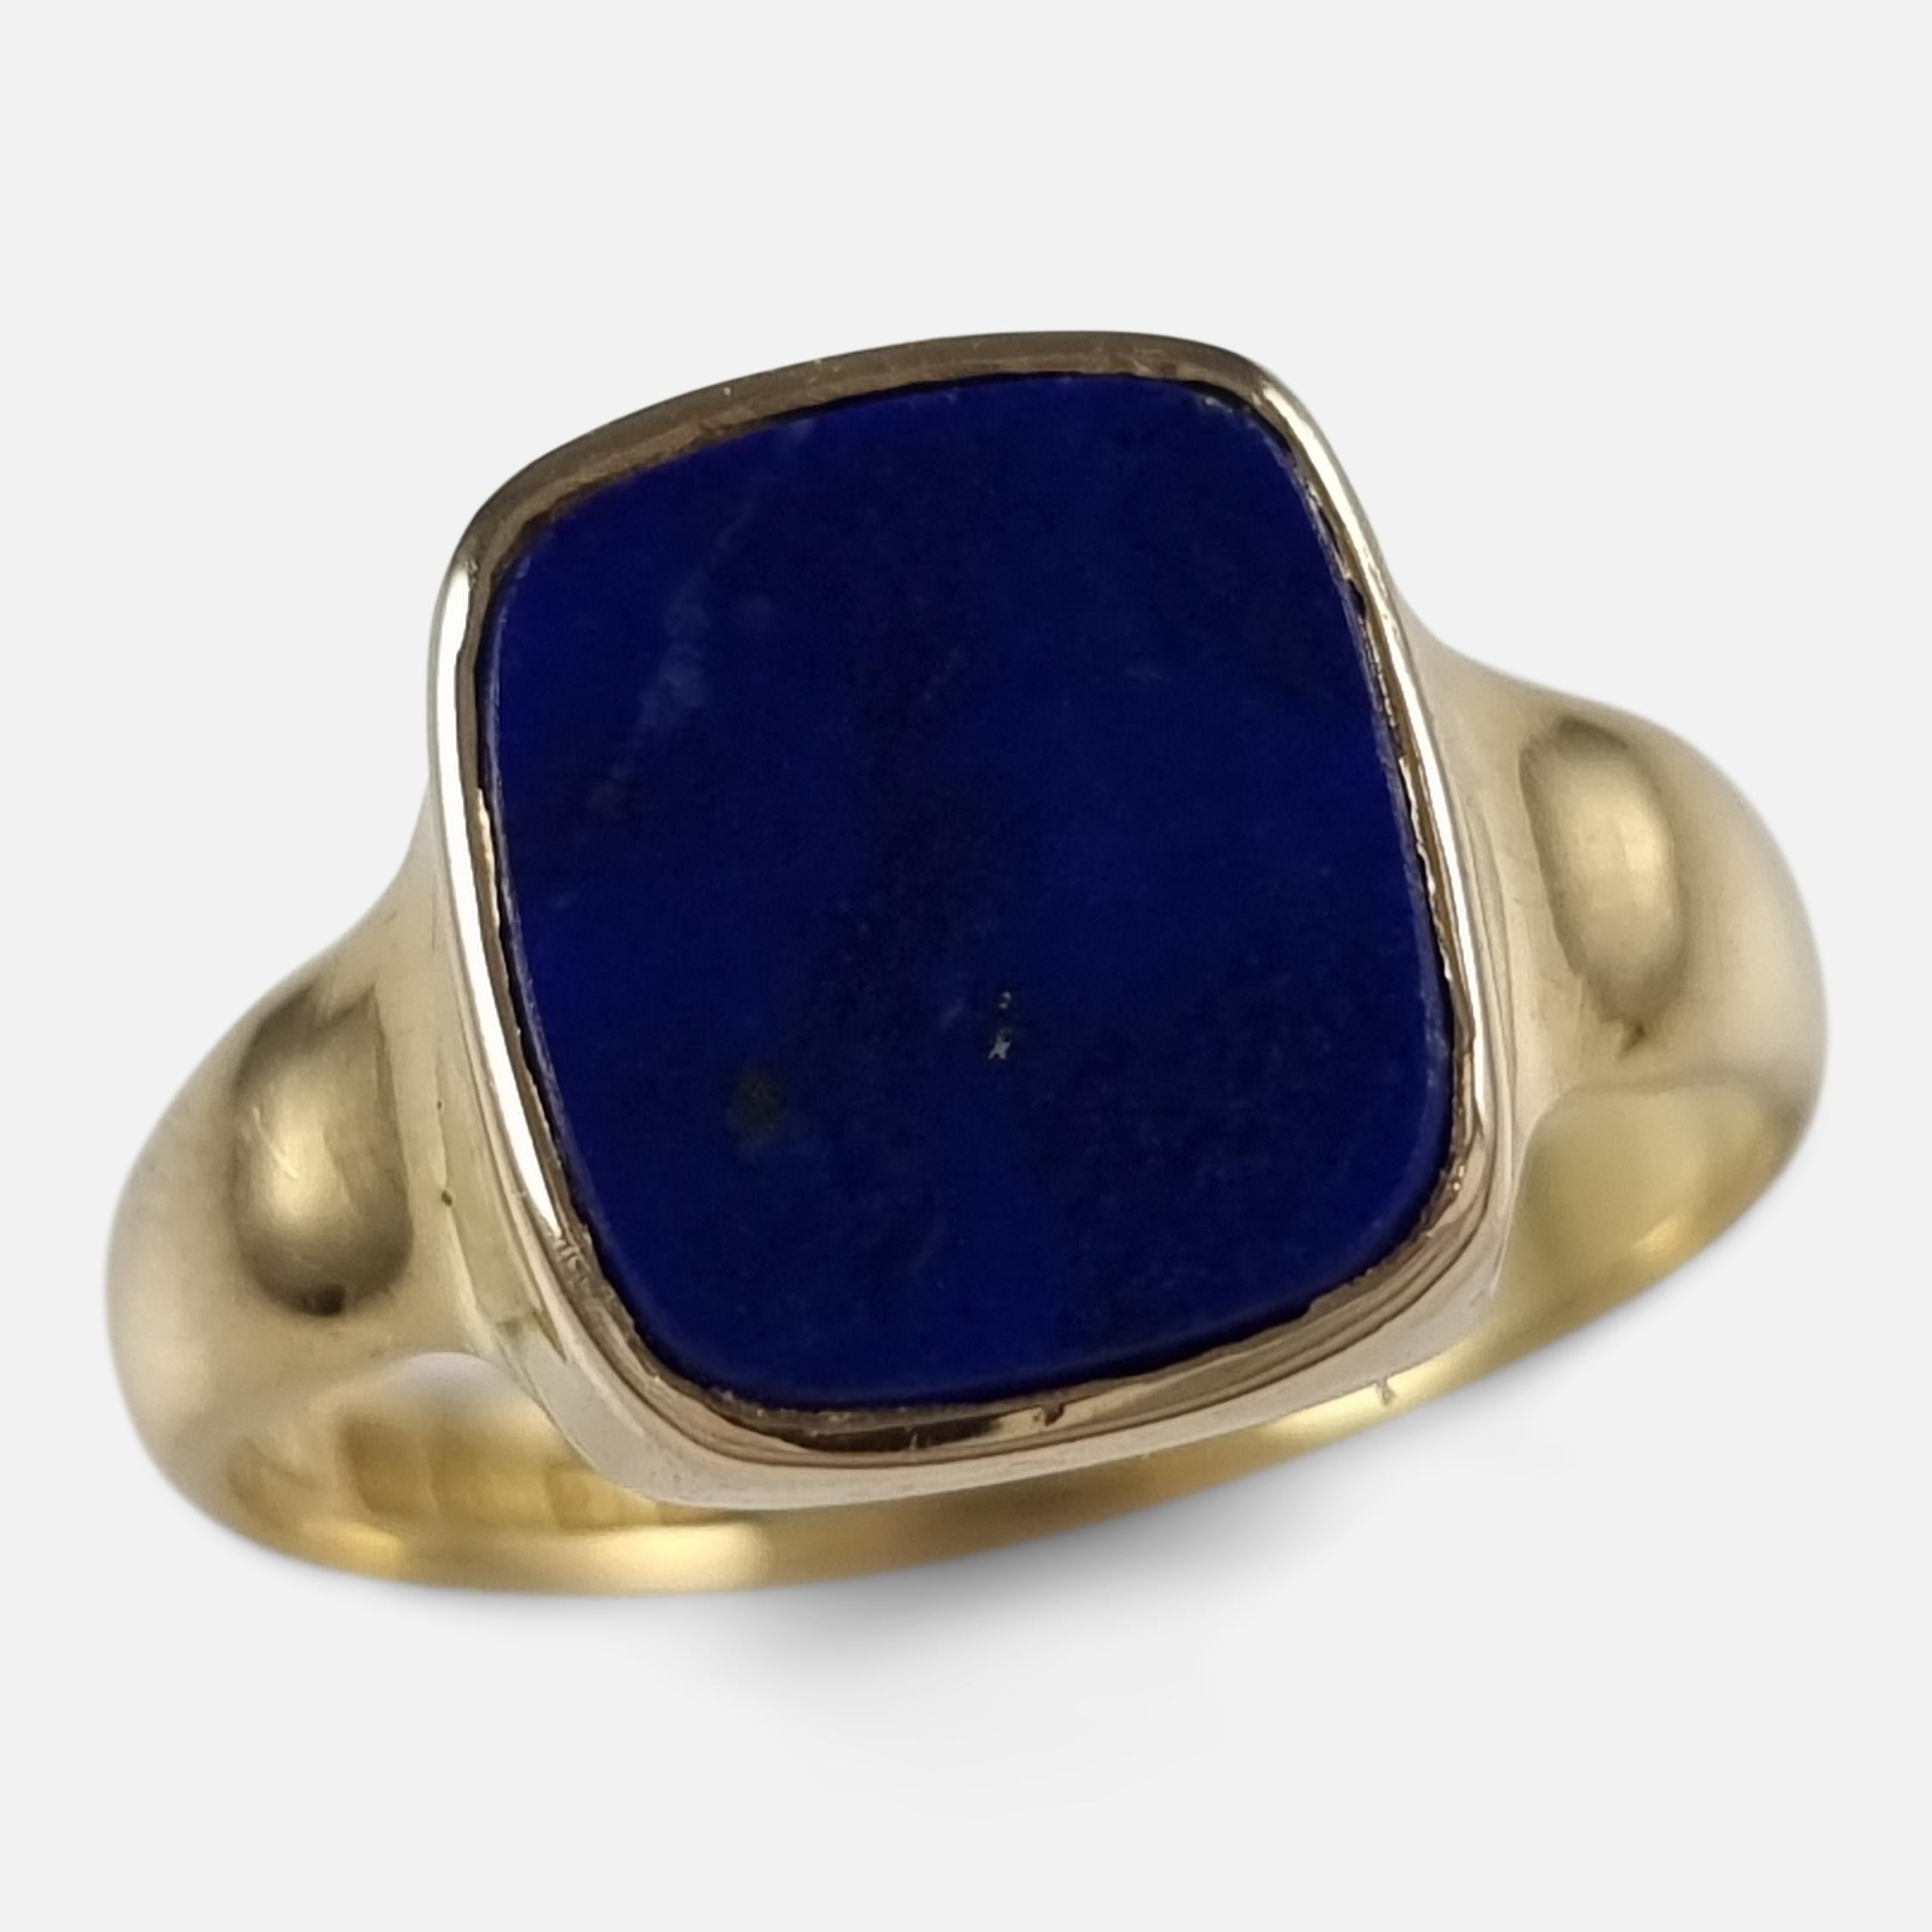 An antique George V 18ct yellow gold Lapis Lazuli signet ring.

The ring is hallmarked with Birmingham marks, date letter 'n' to denote 1912, and stamped '18' for 18ct carat gold.

Date: - 1912.

Engraving: - None.

Maker: - 'G&G·N'.

Measurement: -